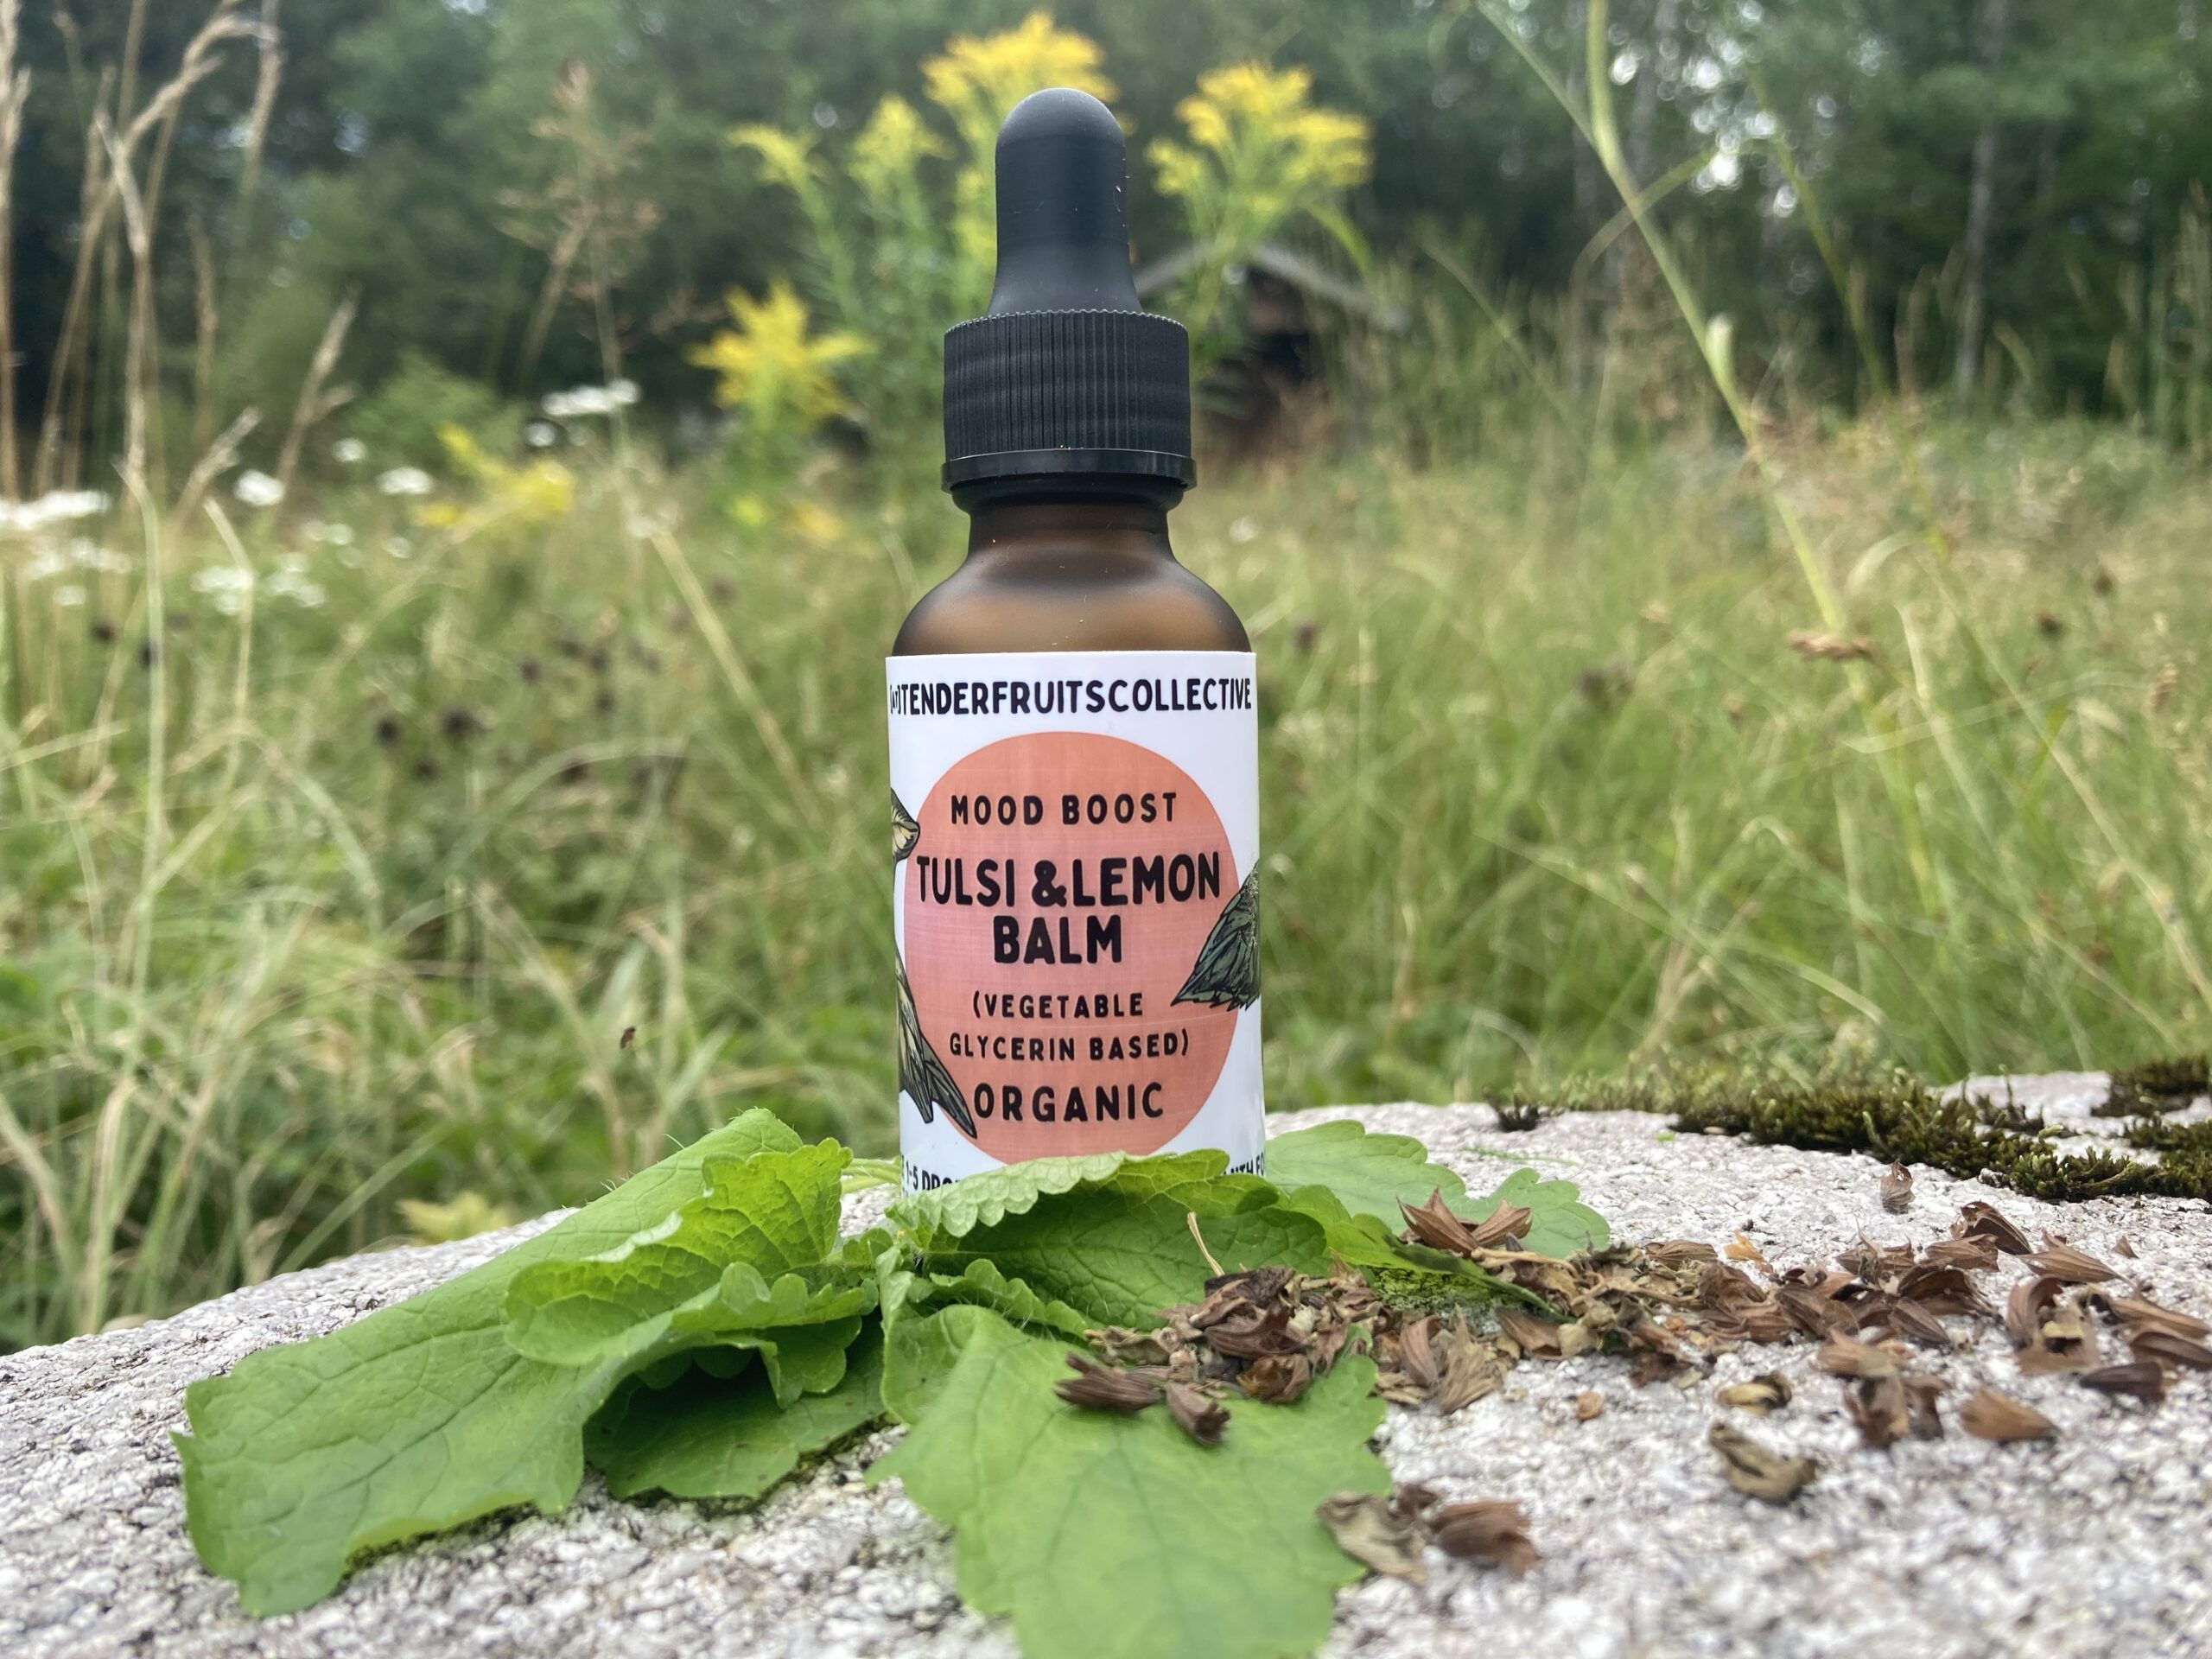 A photo of a 1 oz, amber colored tincture bottle dropper sitting on a mossy rock with fresh lemon balm and dried tulsi around it. There is tall grass in the background. The label on the bottle has a mustard yellow, circle label that says “tulsi and lemon balm” "mood boost", "vegetable glycerine based" "organic" and giving instructions to take 1-5 drops as when as needed to boost mood. 